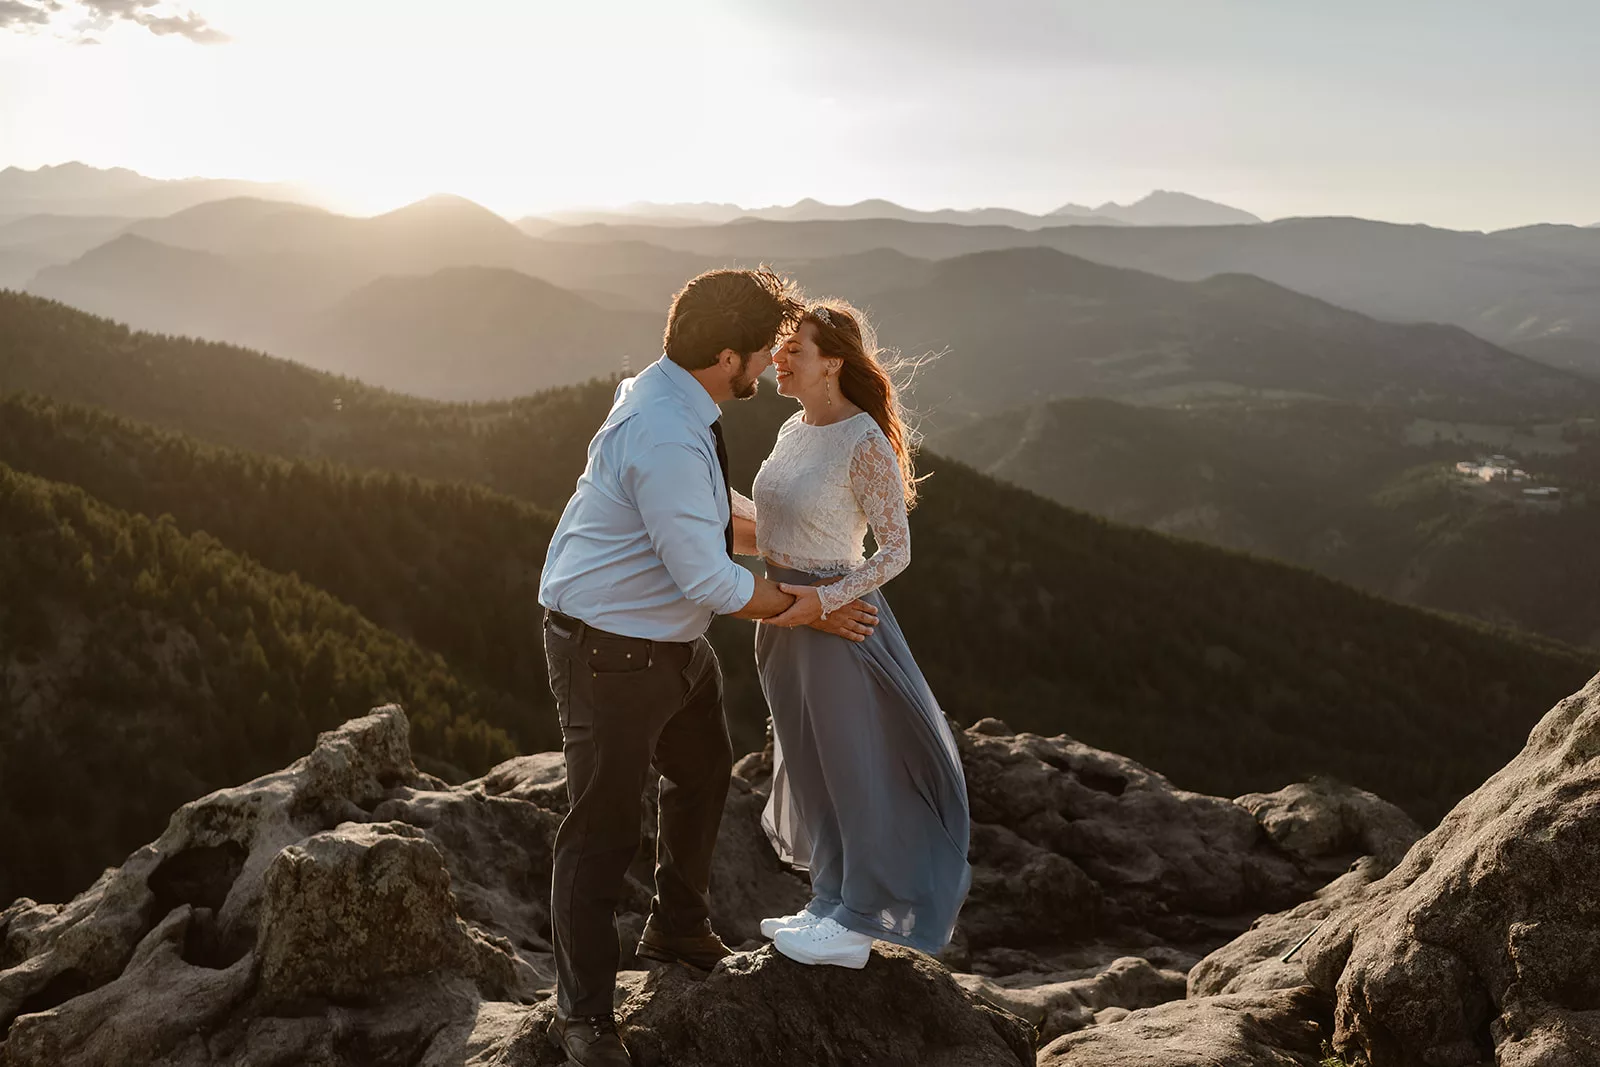 A man and woman lean in close on a mountain cliffside during golden hour during their engagement photoshoot.